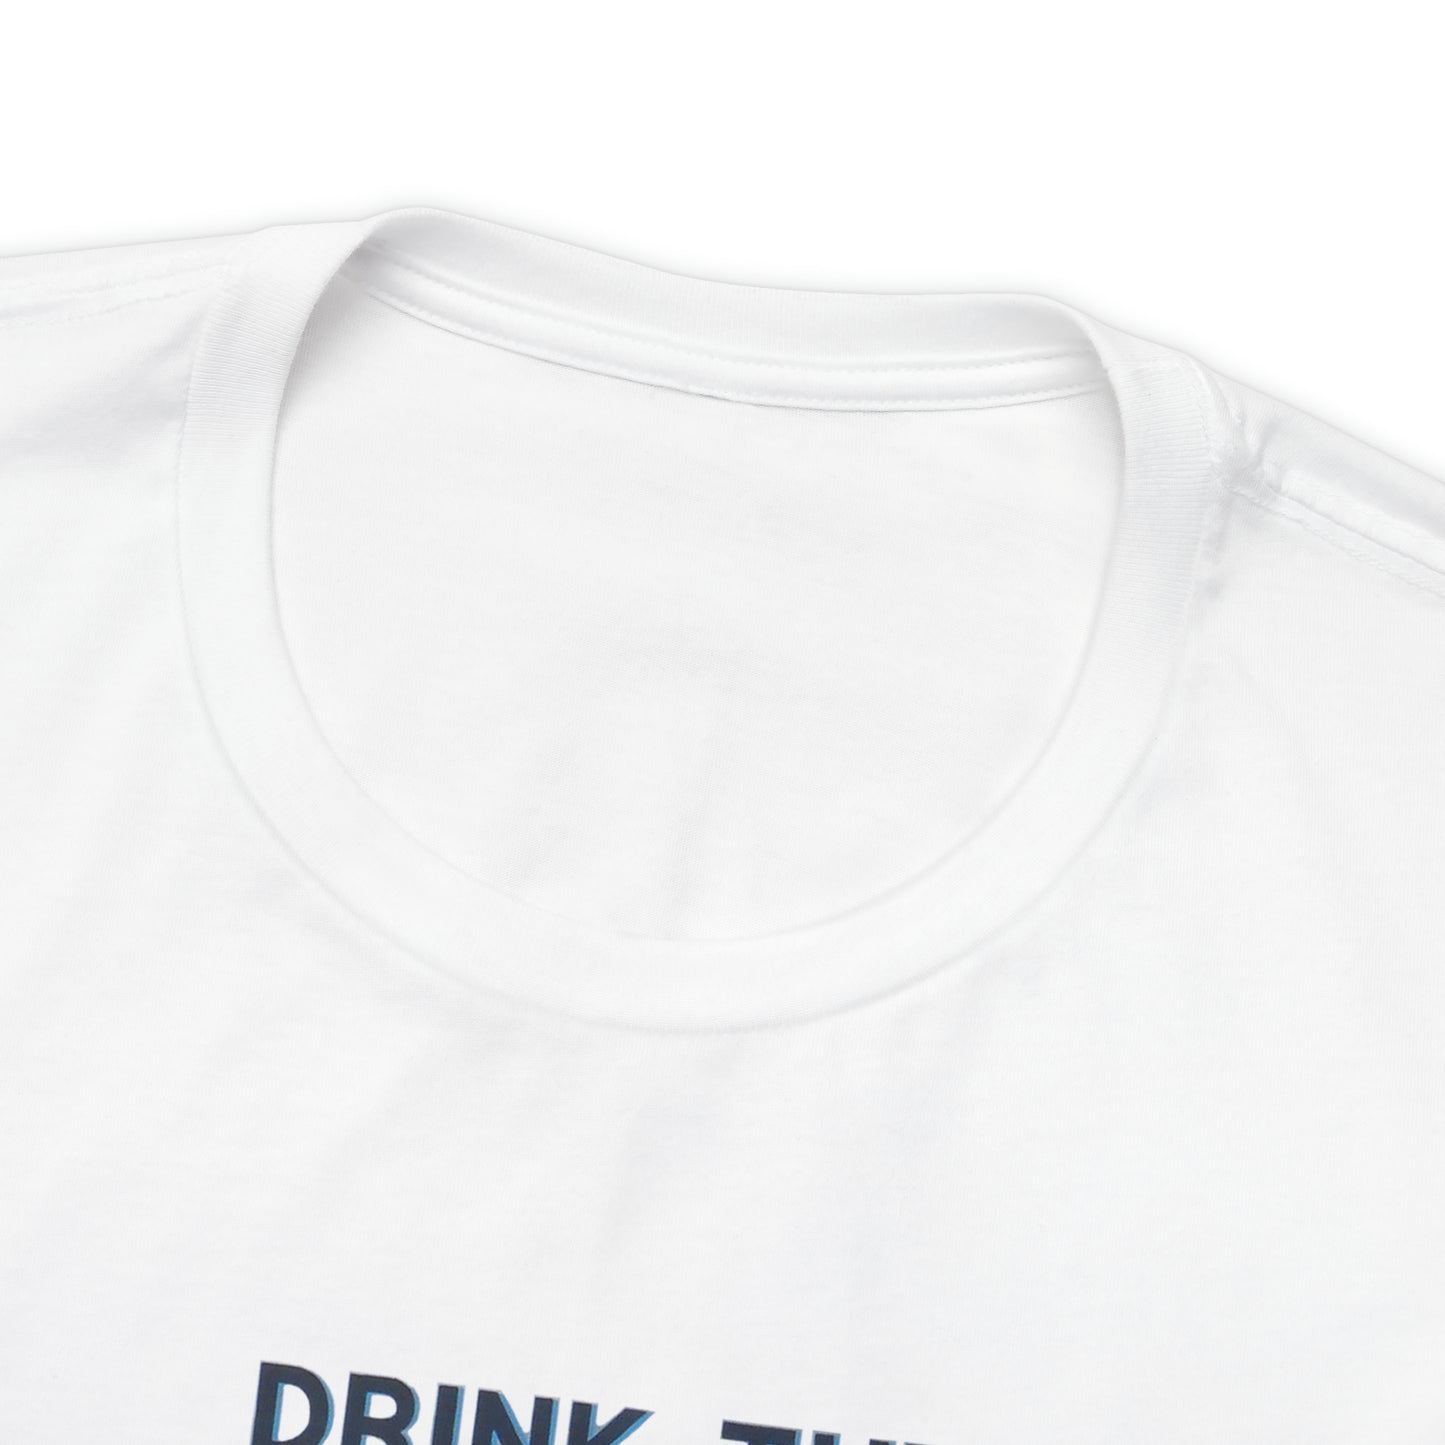 Drink the Coolaid Cotton Tee